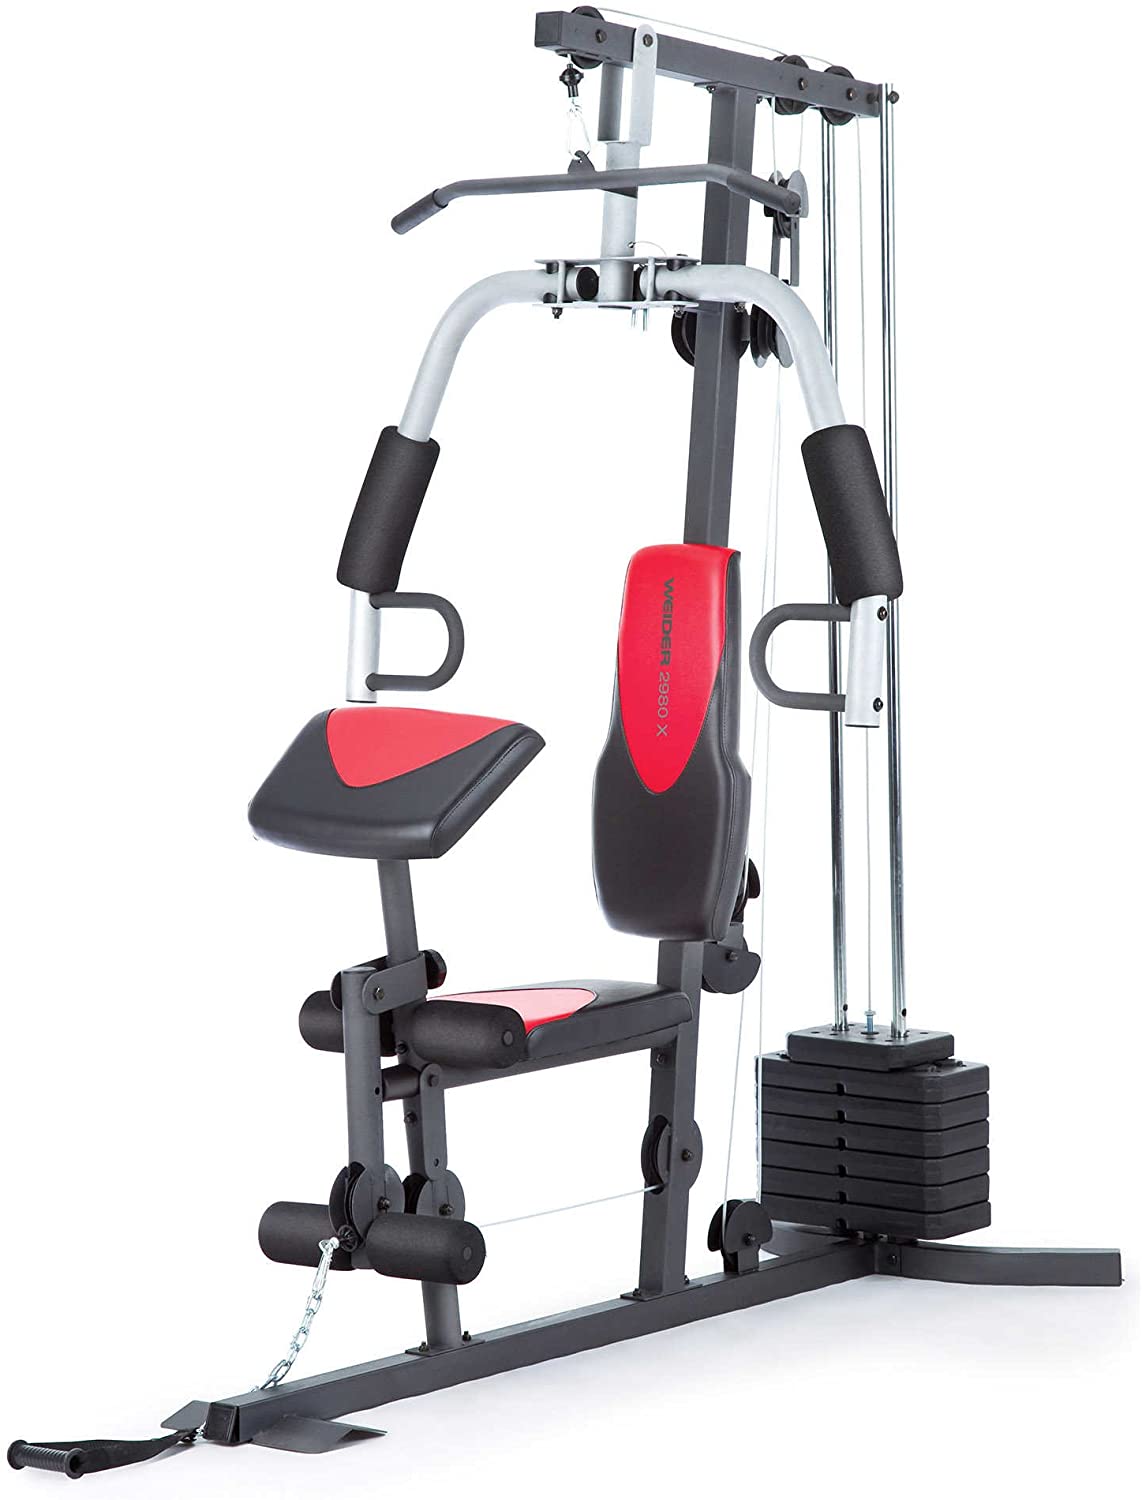 Simple Weider Pro 6900 Workout Manual for Beginner